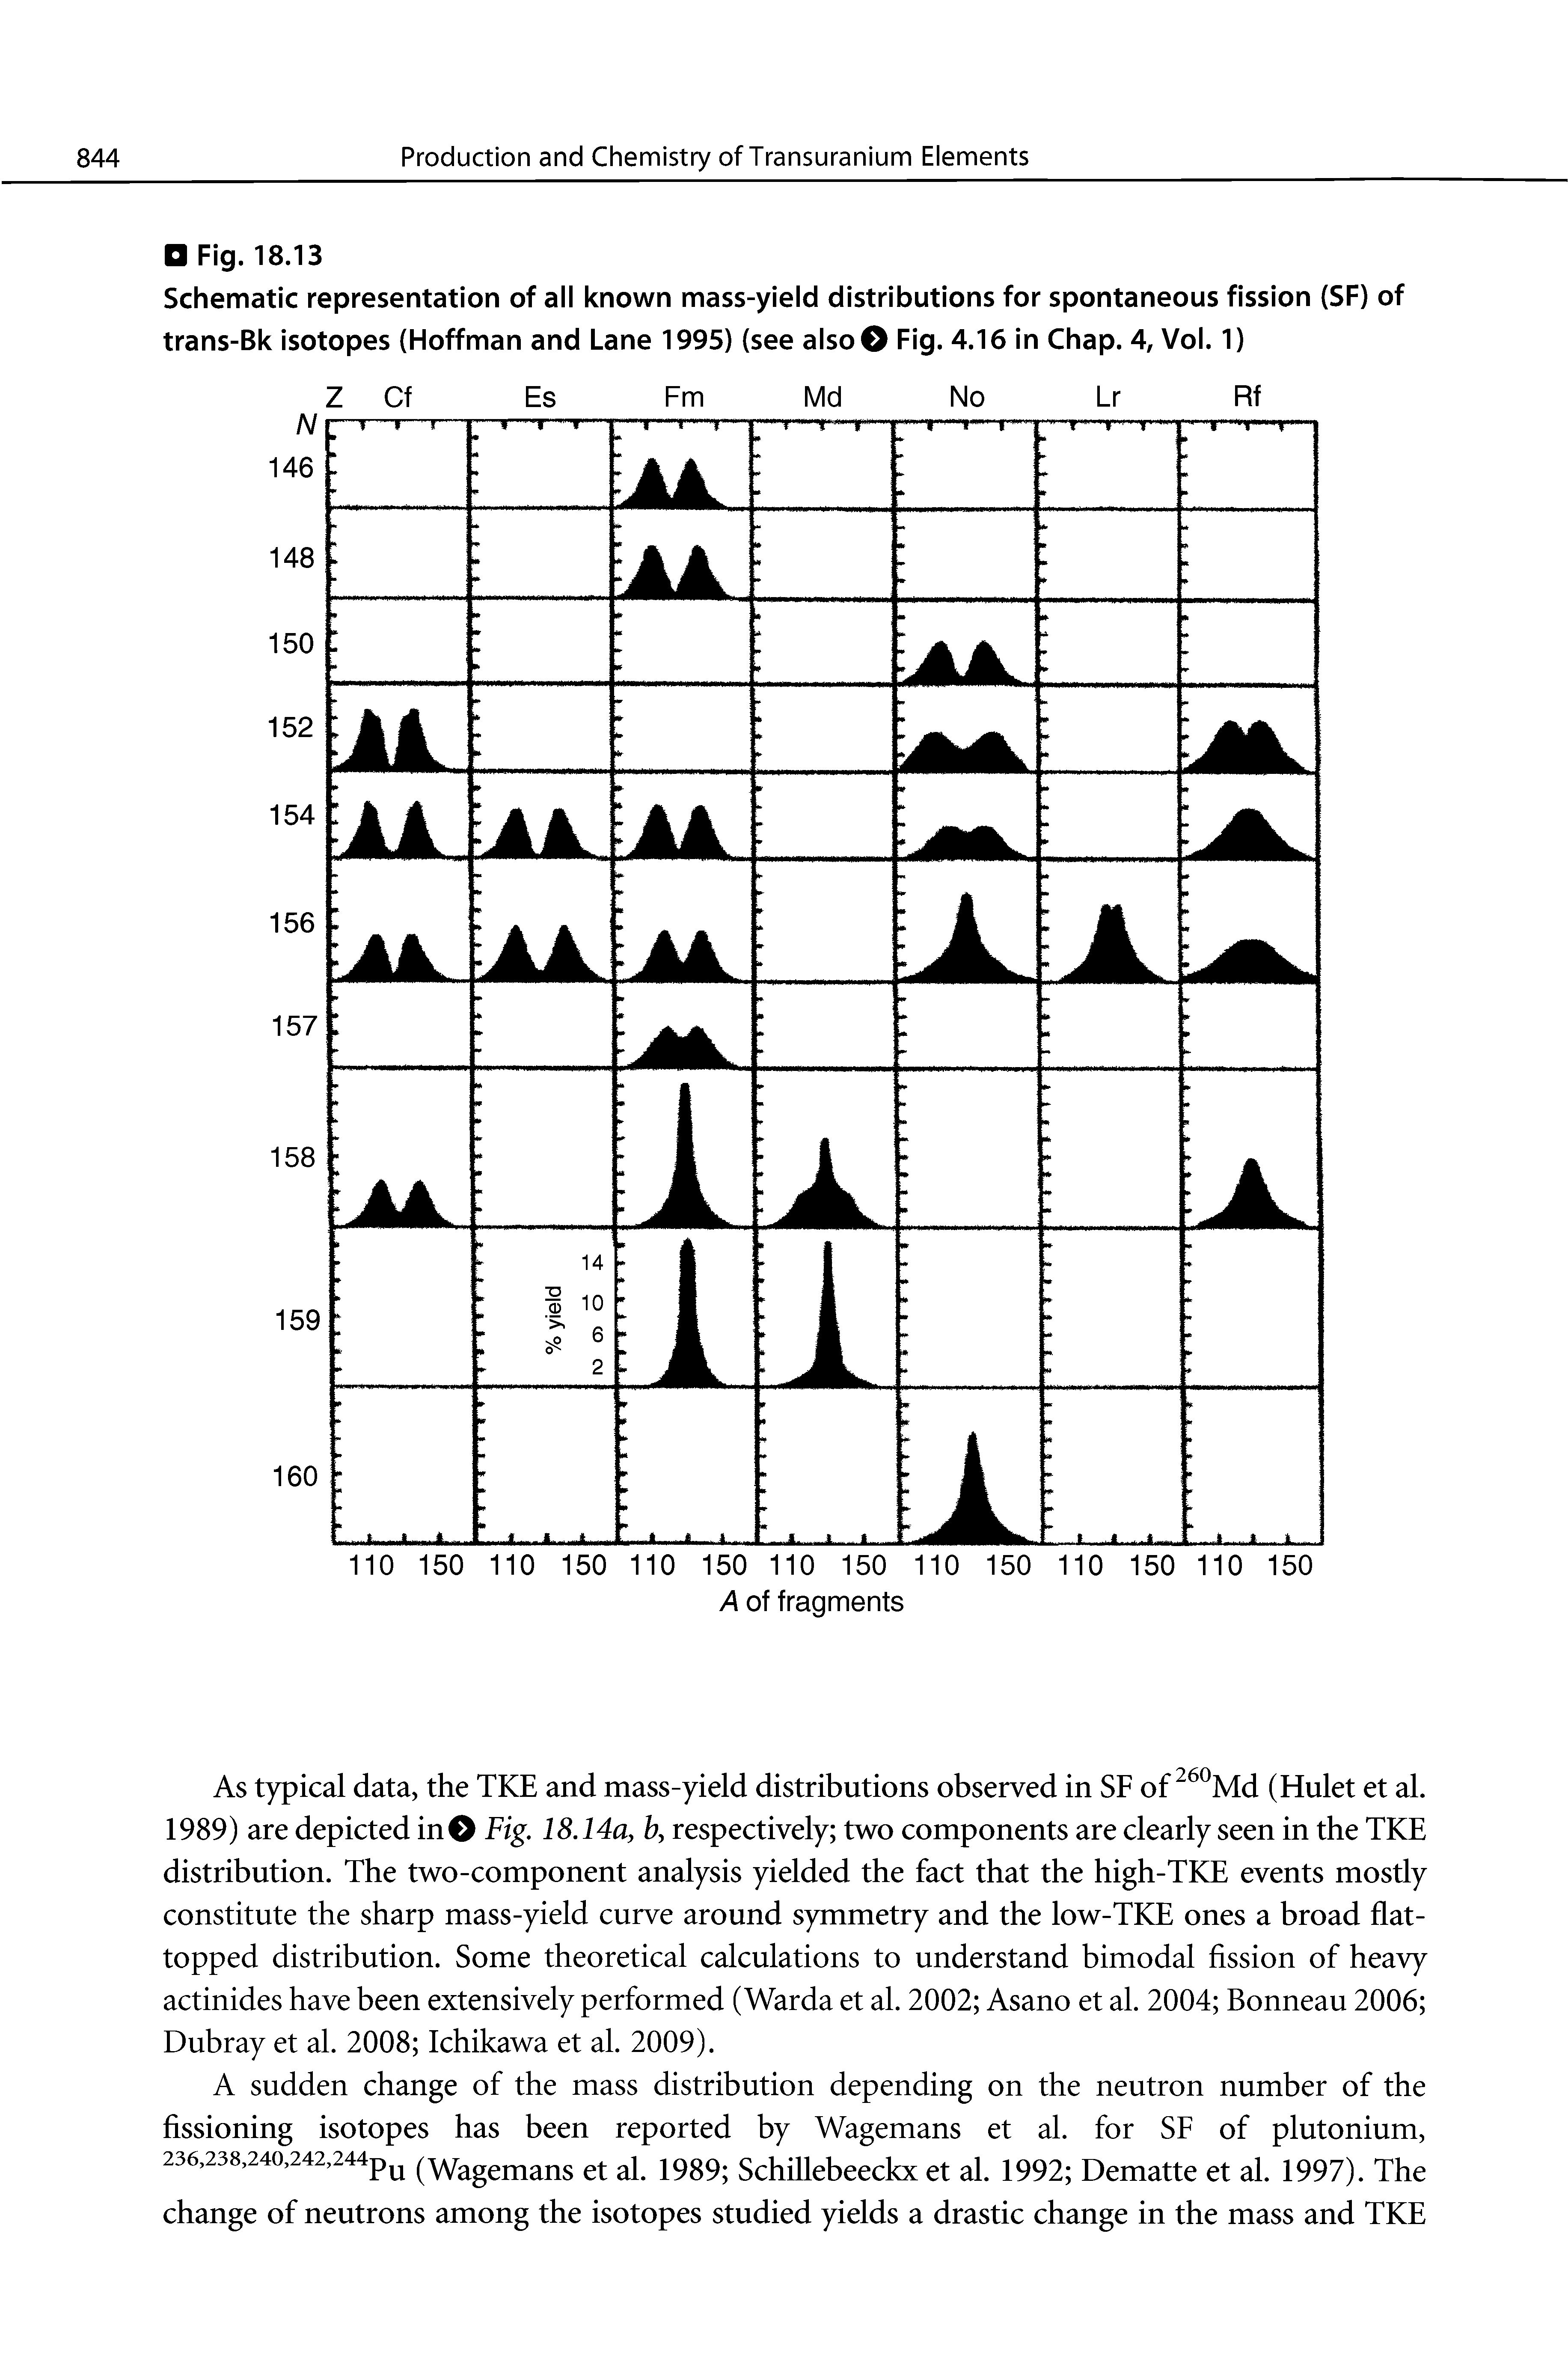 Schematic representation of all known mass-yield distributions for spontaneous fission (SF) of trans-Bk isotopes (Hoffman and Lane 1995) (see also Fig. 4.16 in Chap. 4, Vol. 1)...